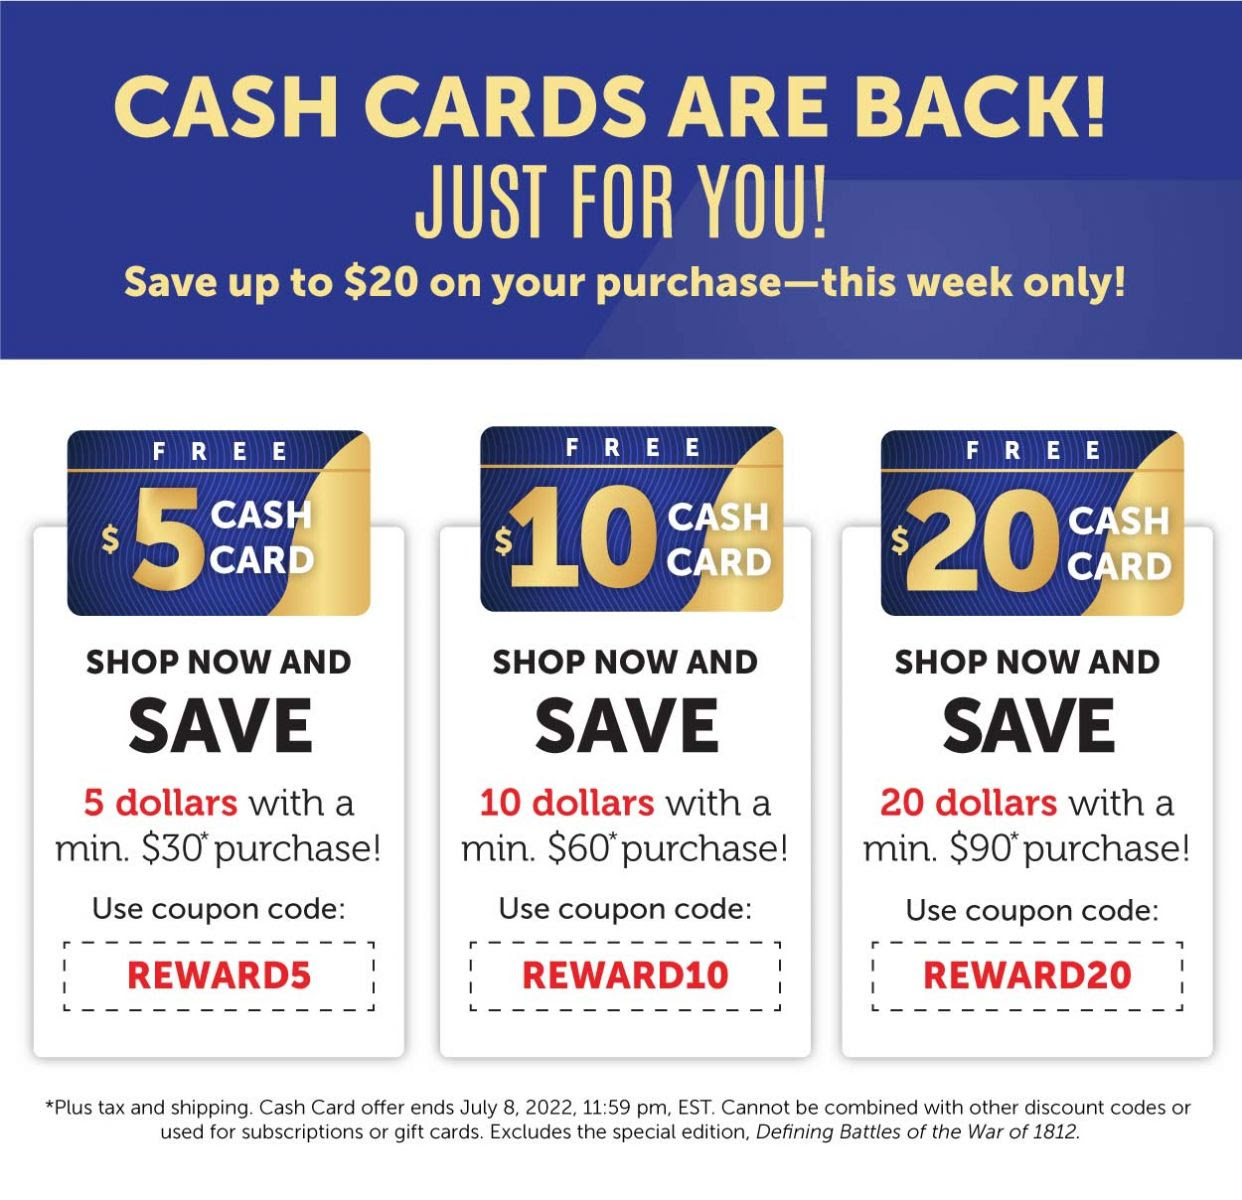 CASH CARDS ARE BACK! JUST FOR YOU!